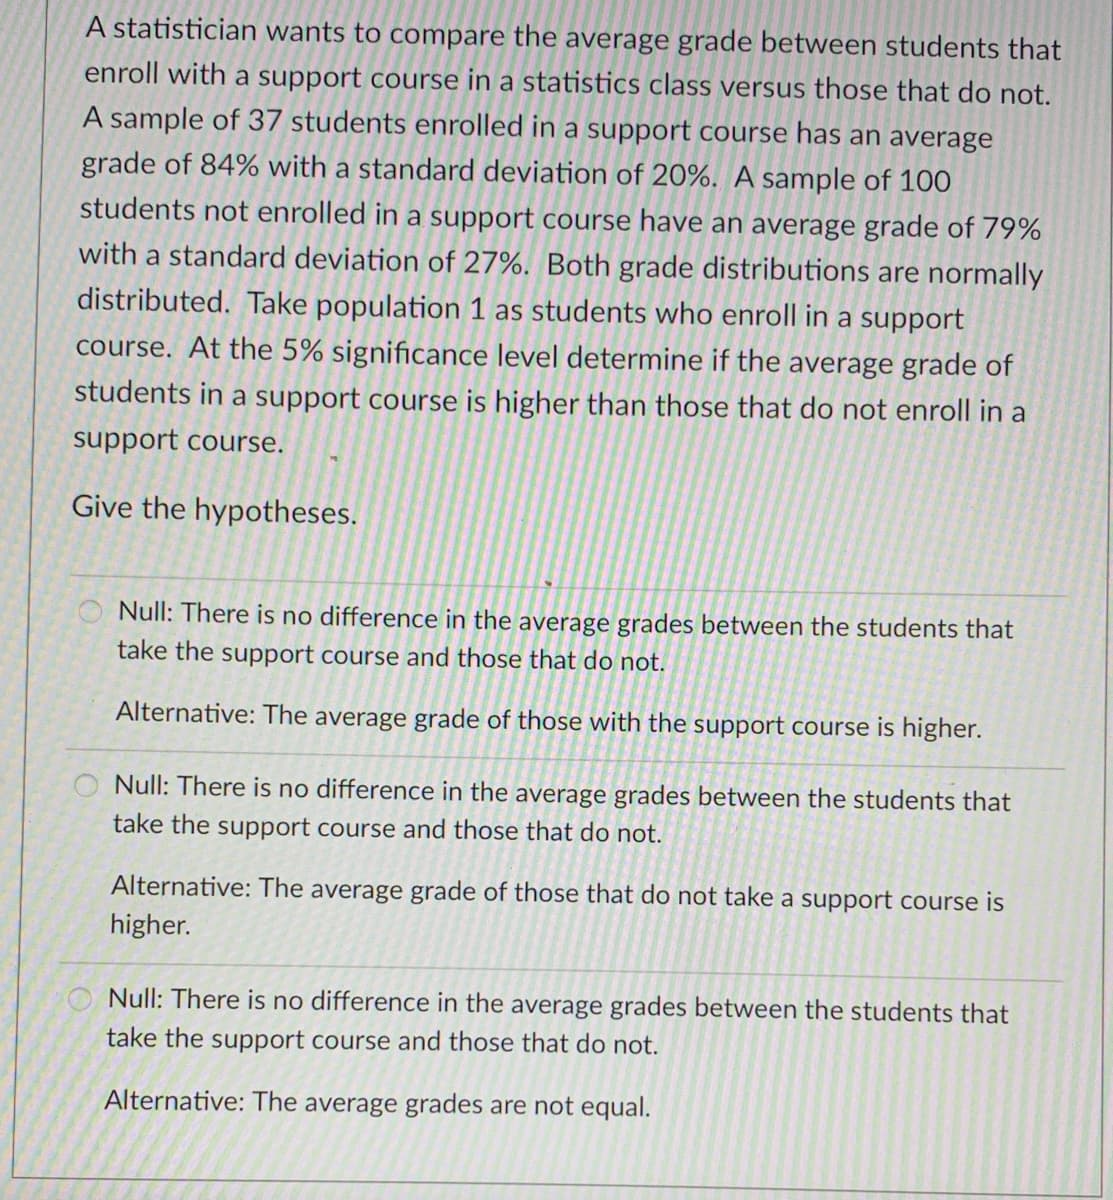 A statistician wants to compare the average grade between students that
enroll with a support course in a statistics class versus those that do not.
A sample of 37 students enrolled in a support course has an average
grade of 84% with a standard deviation of 20%. A sample of 100
students not enrolled in a support course have an average grade of 79%
with a standard deviation of 27%. Both grade distributions are normally
distributed. Take population 1 as students who enroll in a support
course. At the 5% significance level determine if the average grade of
students in a support course is higher than those that do not enroll in a
support course.
Give the hypotheses.
Null: There is no difference in the average grades between the students that
take the support course and those that do not.
Alternative: The average grade of those with the support course is higher.
O Null: There is no difference in the average grades between the students that
take the support course and those that do not.
Alternative: The average grade of those that do not take a support course is
higher.
Null: There is no difference in the average grades between the students that
take the support course and those that do not.
Alternative: The average grades are not equal.
